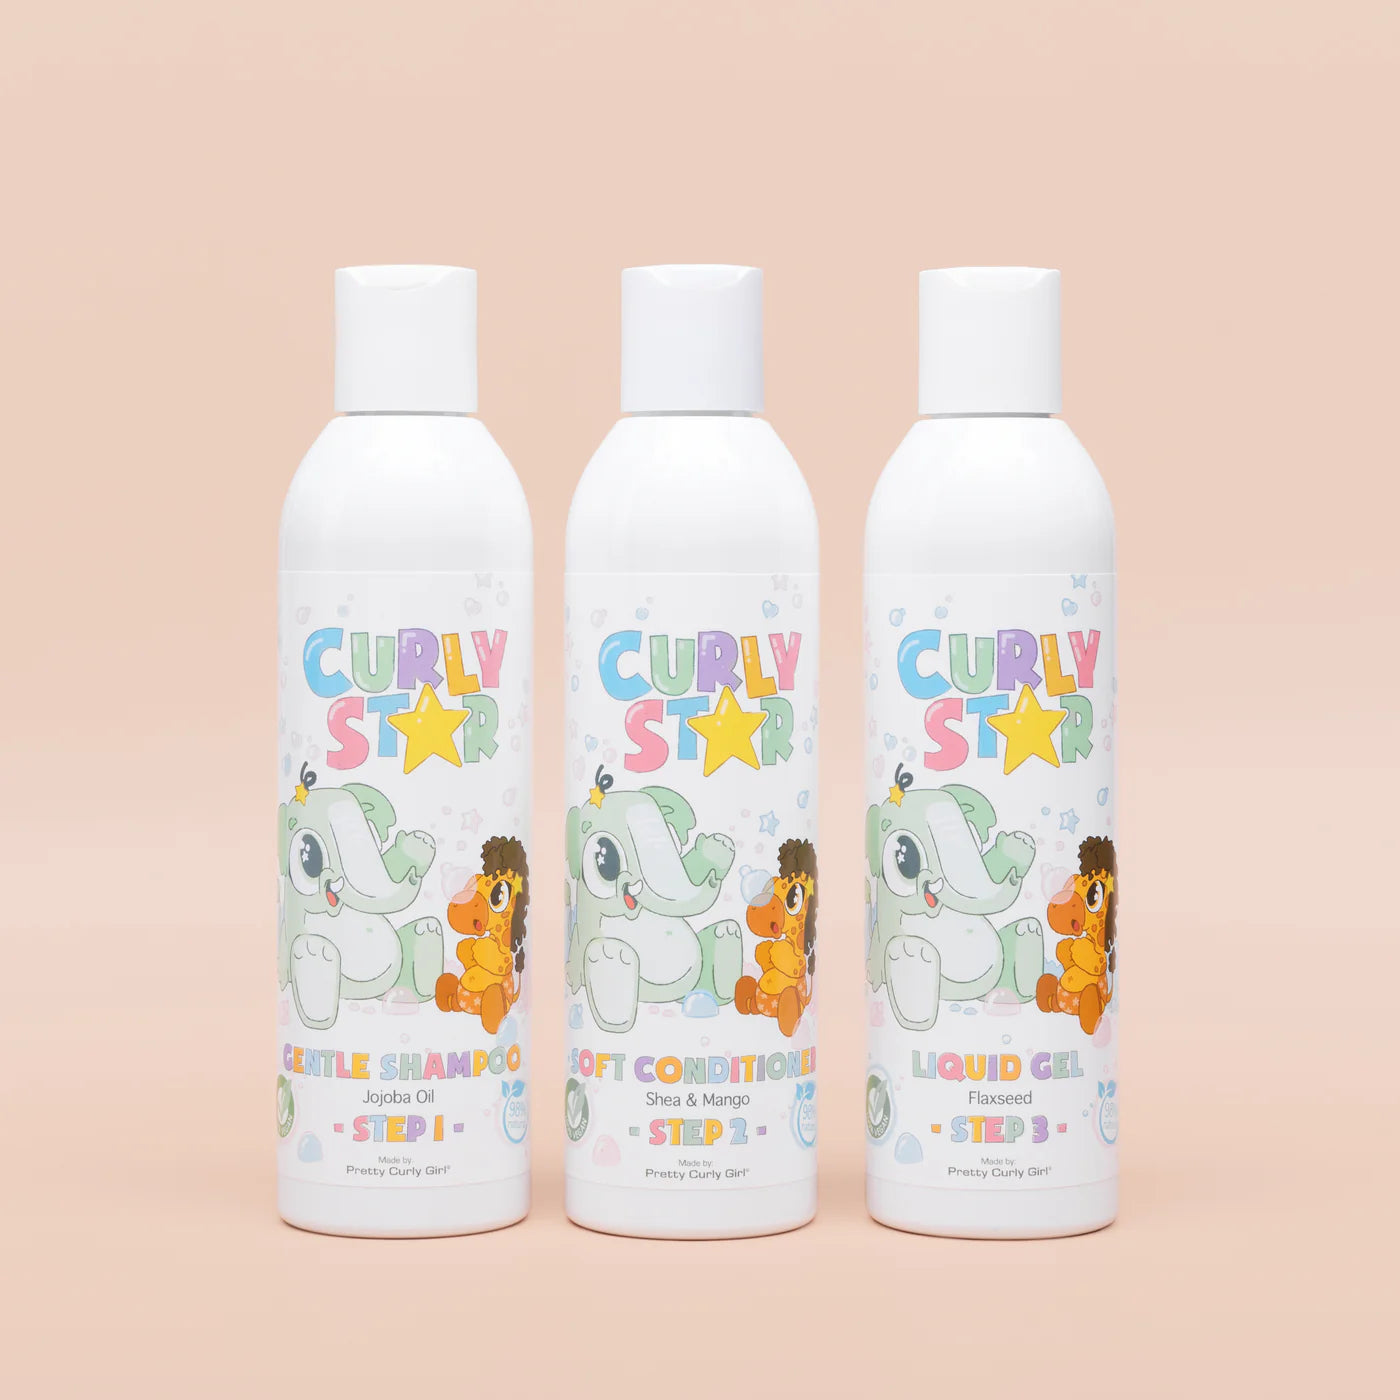 Curly Star - Bundle set Fragrance Free - 3 products